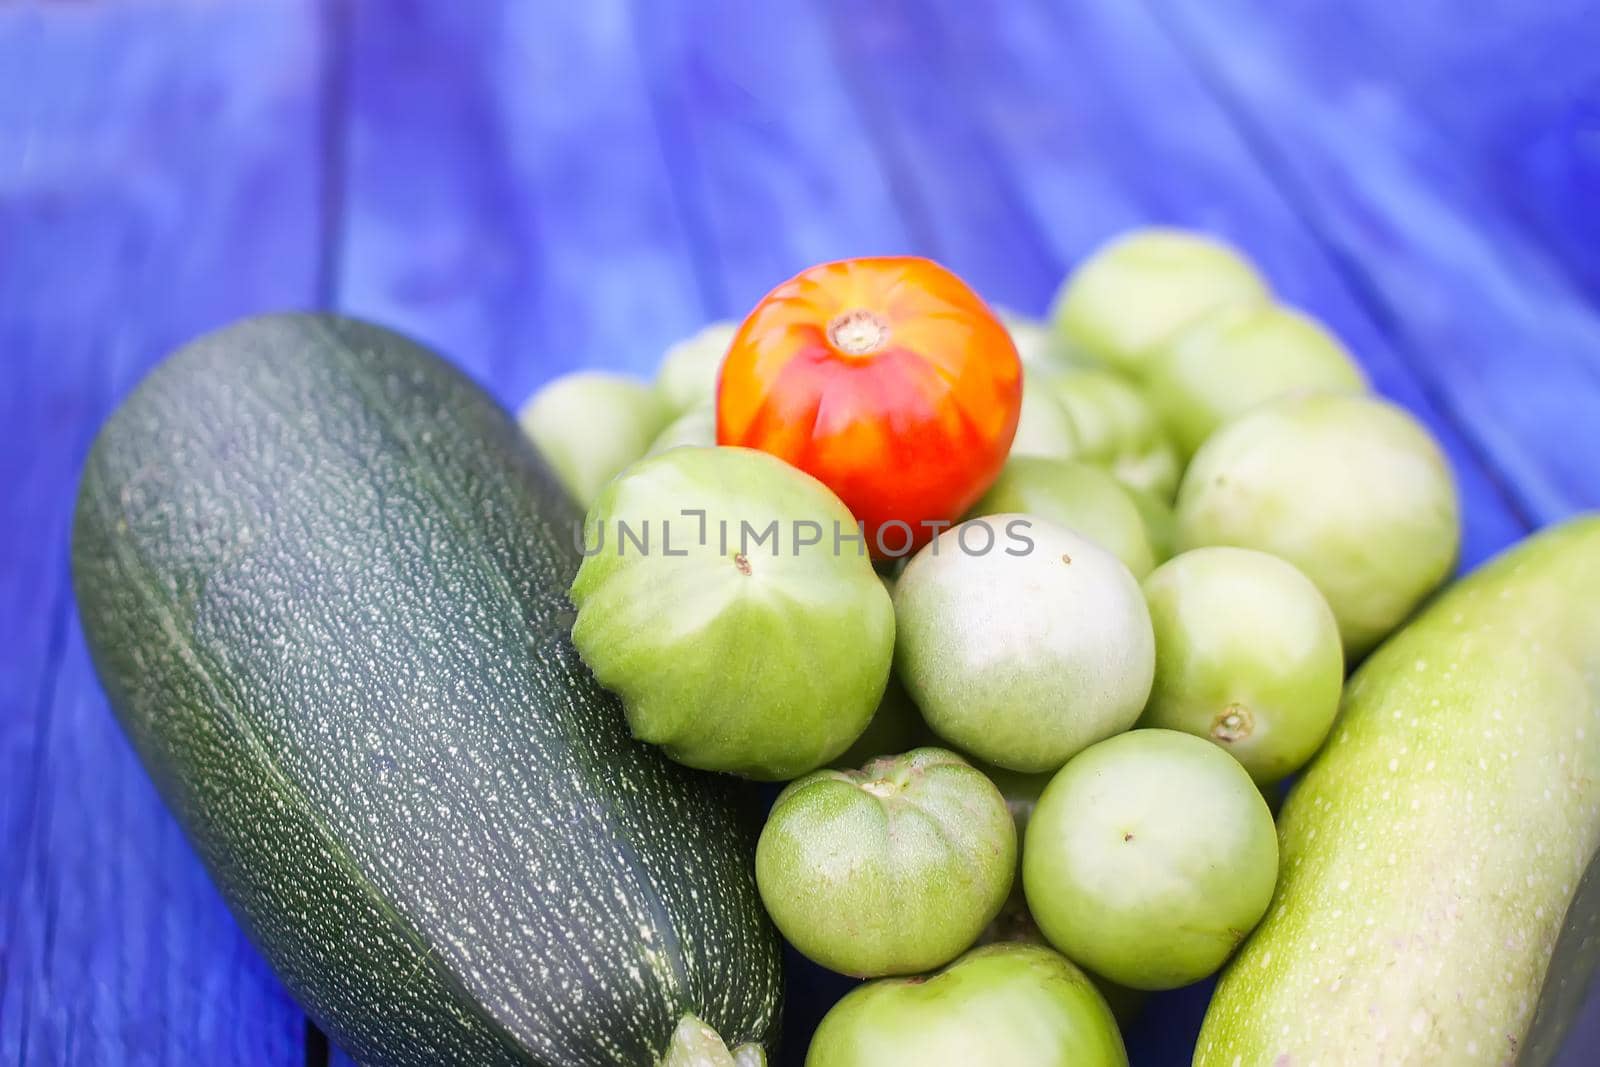 Zucchini and unripe tomatoes. Fresh raw organic vegetables on wooden boards outdoors.